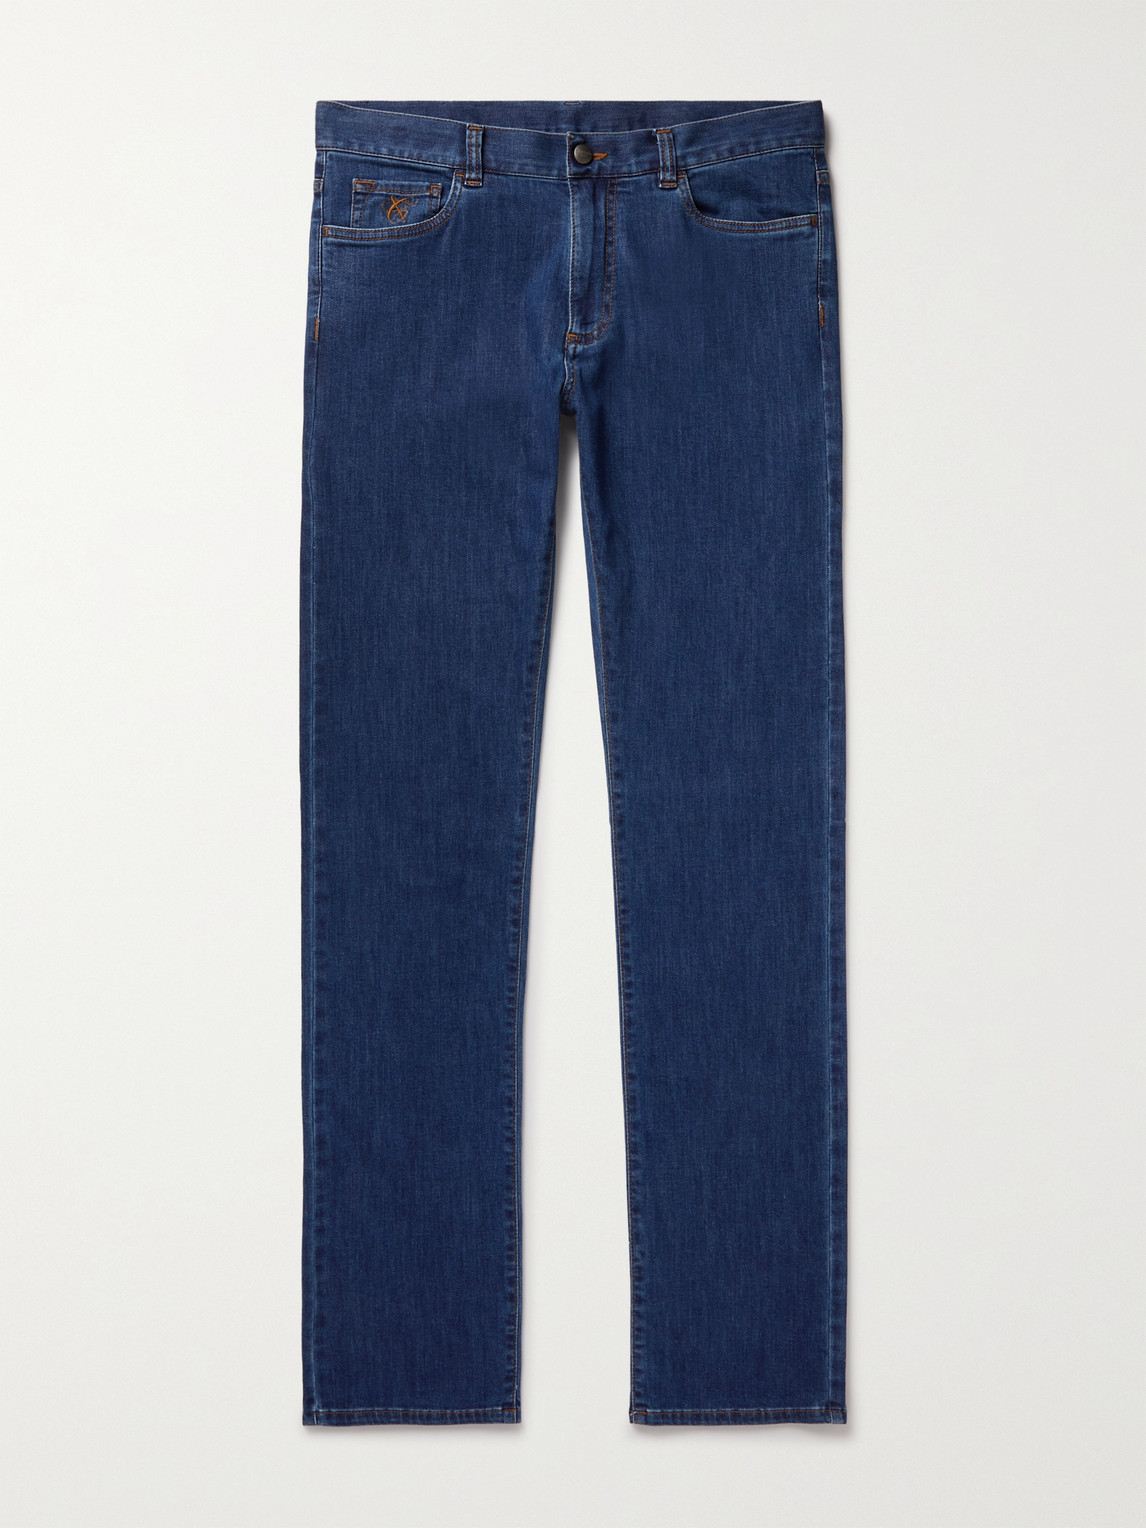 CANALI SLIM-FIT TAPERED JEANS